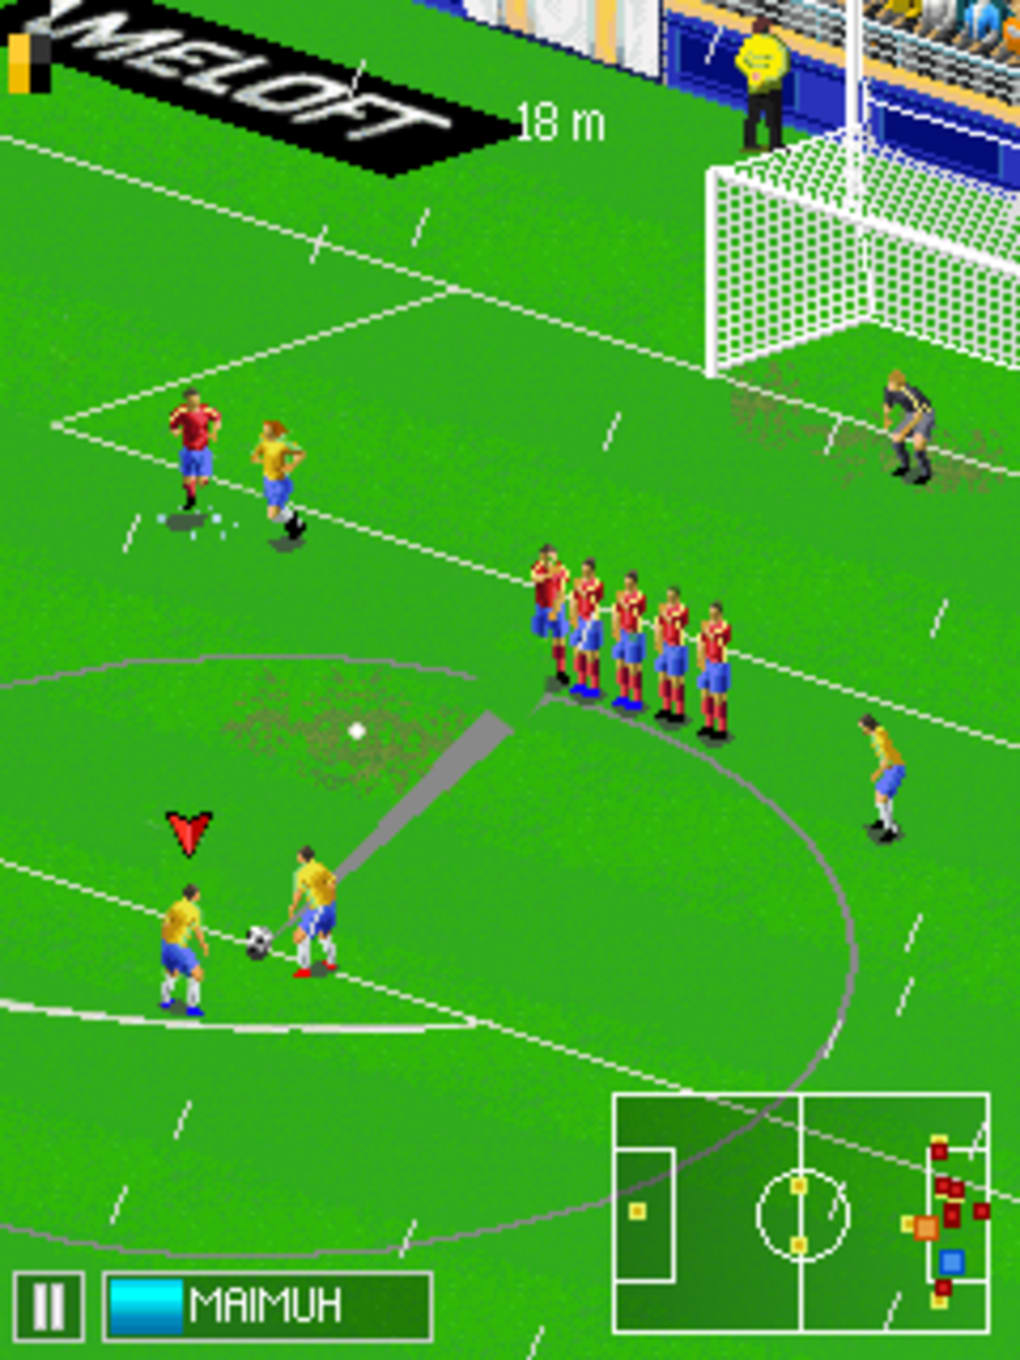 download game java real football manager 320x240